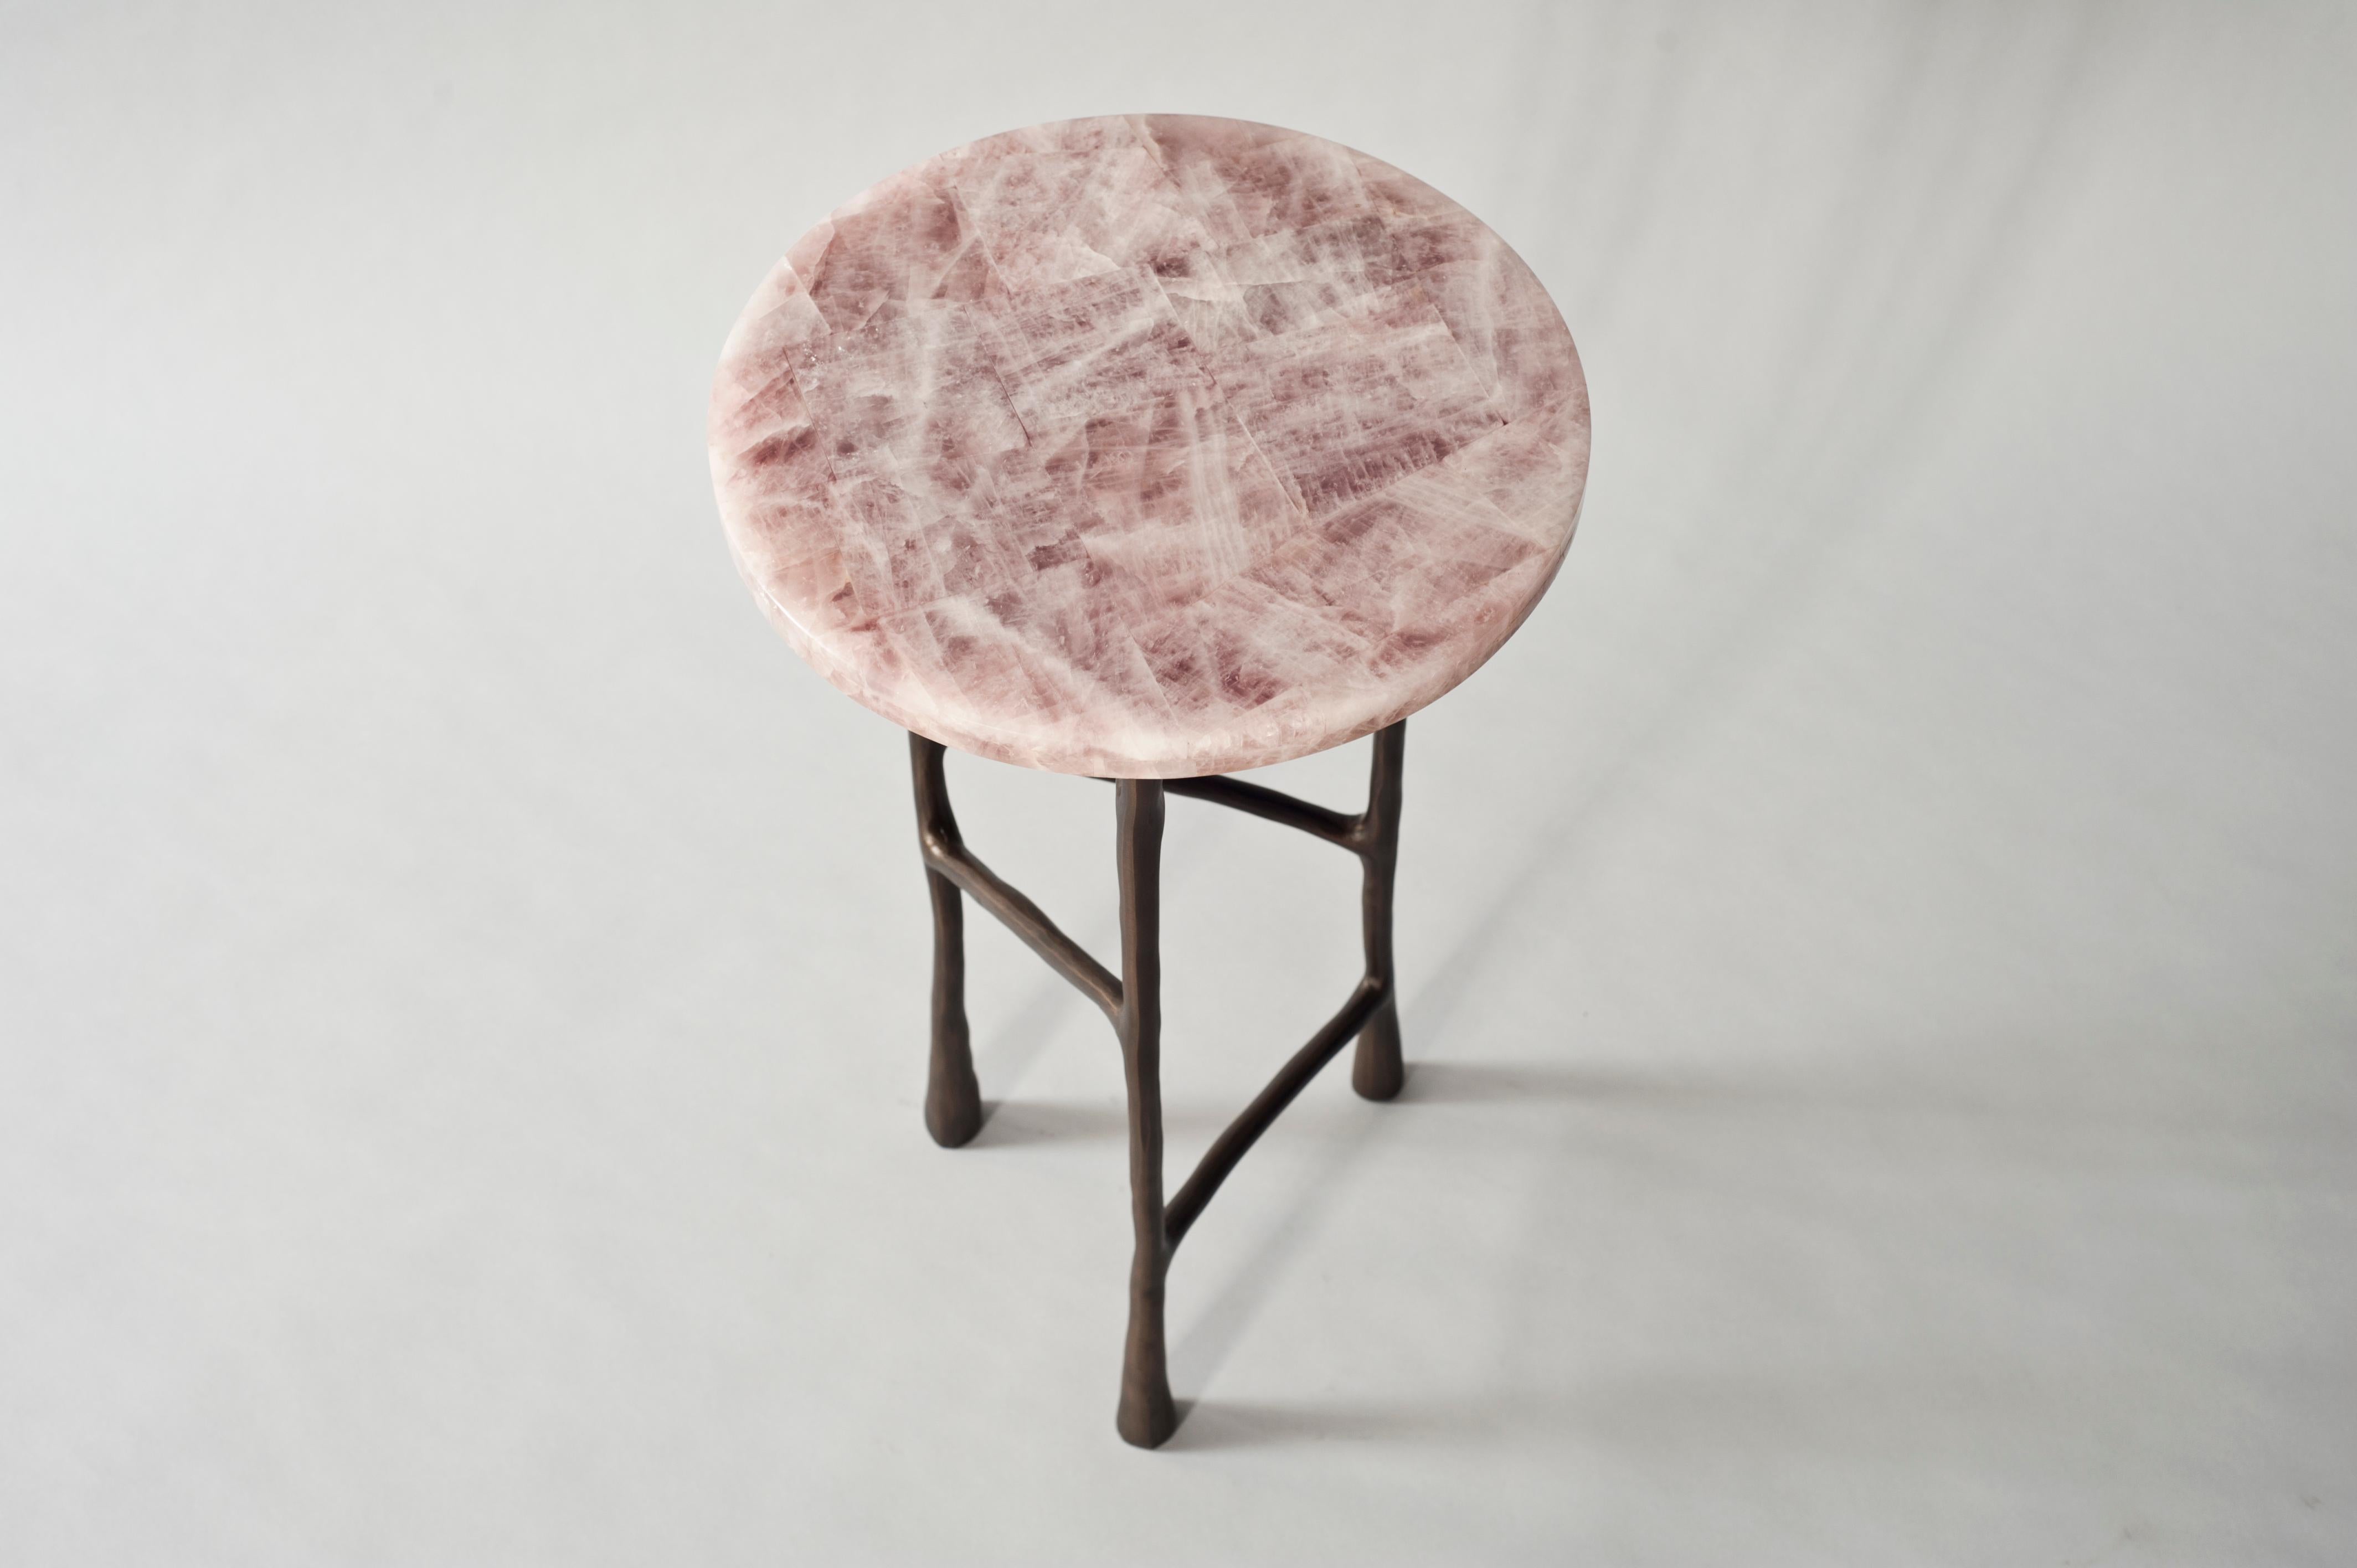 Forma side table by DeMuro Das
Dimensions: 32 x H 54 cm
Materials: Quartz (Rose) -Polished (Random)
 Solid bronze (Antique)

Dimensions and finishes can be customized.

DeMuro Das is an international design firm and the aesthetic and cultural